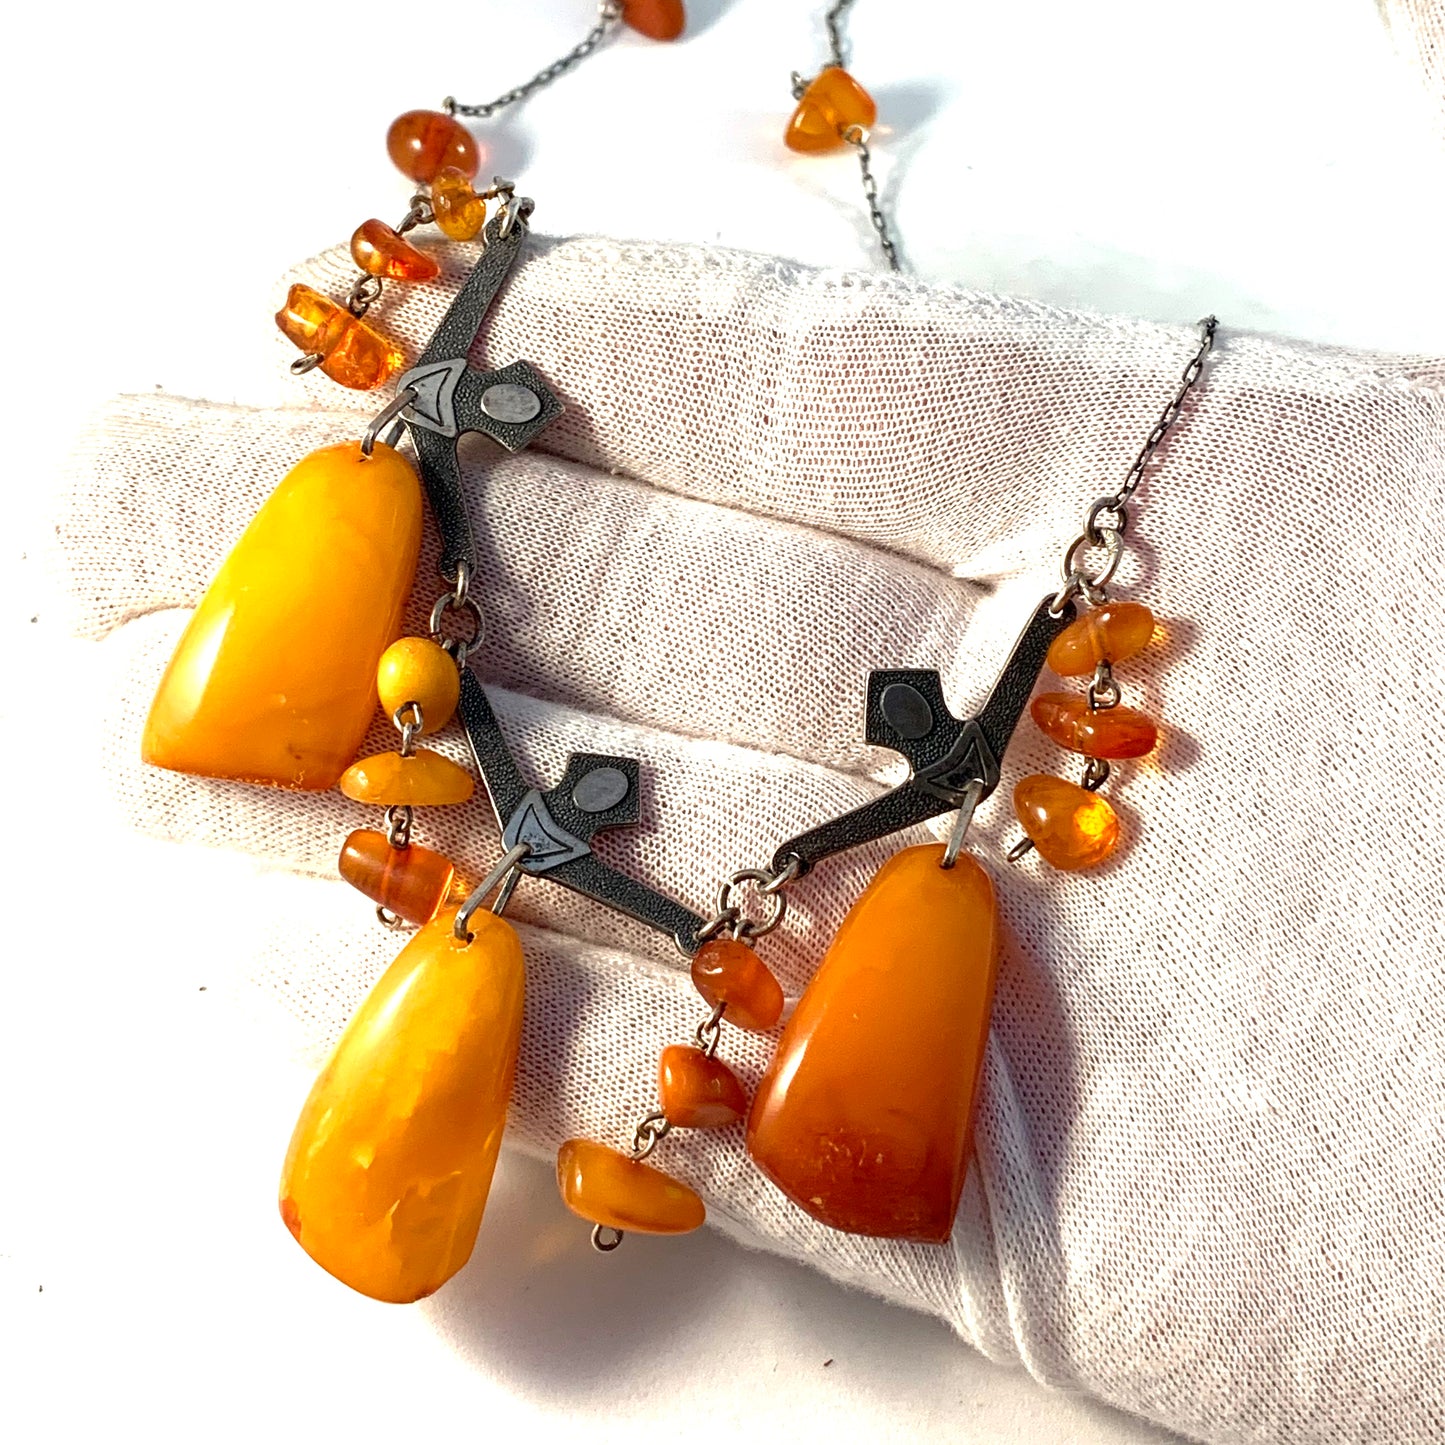 Russia, Soviet Era 1960s Solid 875 Silver Baltic Amber Necklace.